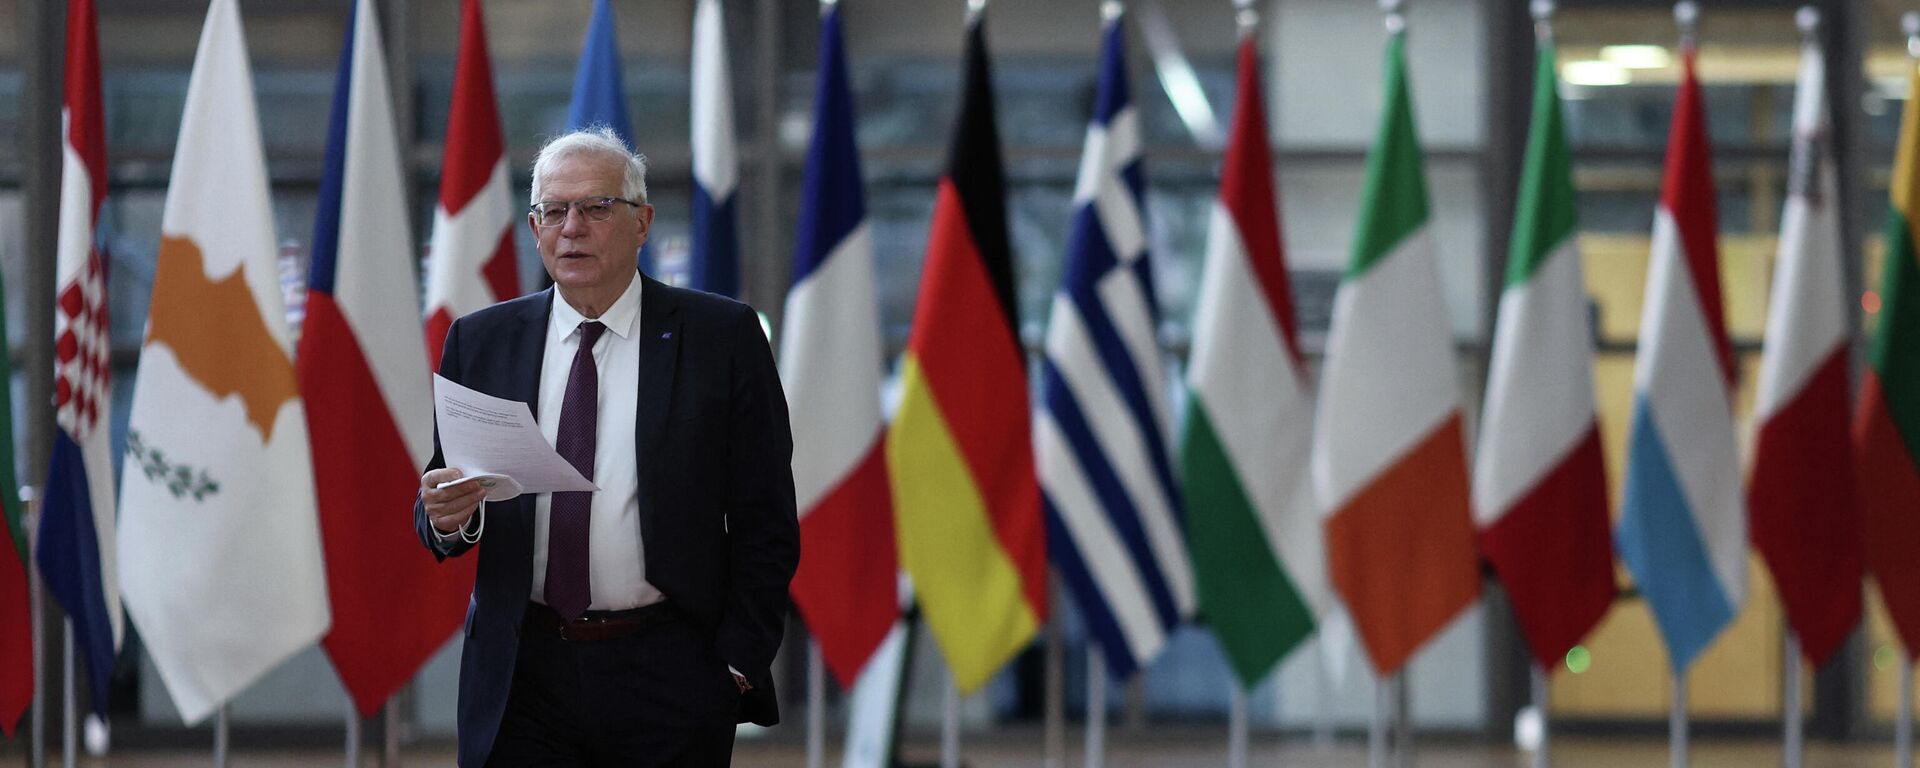 European Union High Representative for Foreign Affairs and Security Policy Josep Borrell arrives for a Foreign Affairs Council meeting at the EU headquarters in Brussels on February 21, 2022.  - Sputnik International, 1920, 07.05.2022